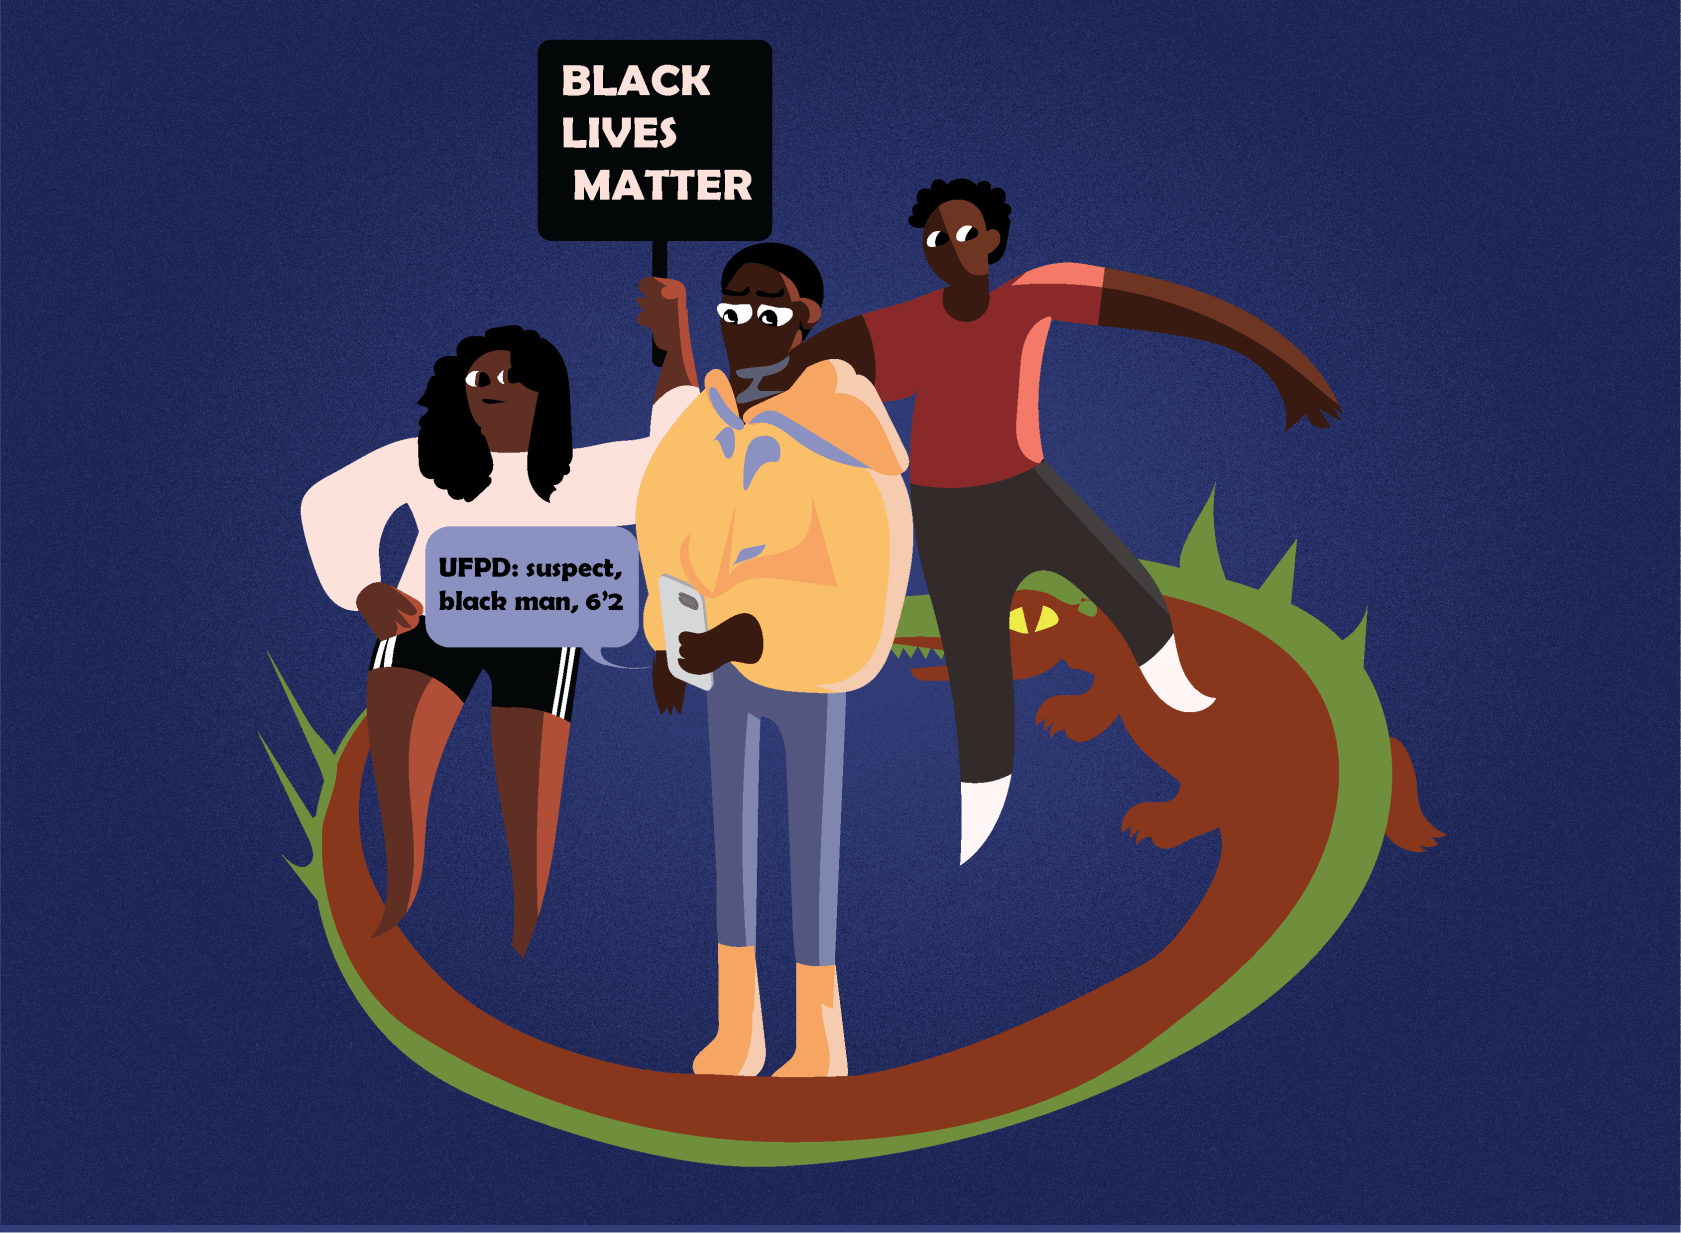 Black students' experience on campus